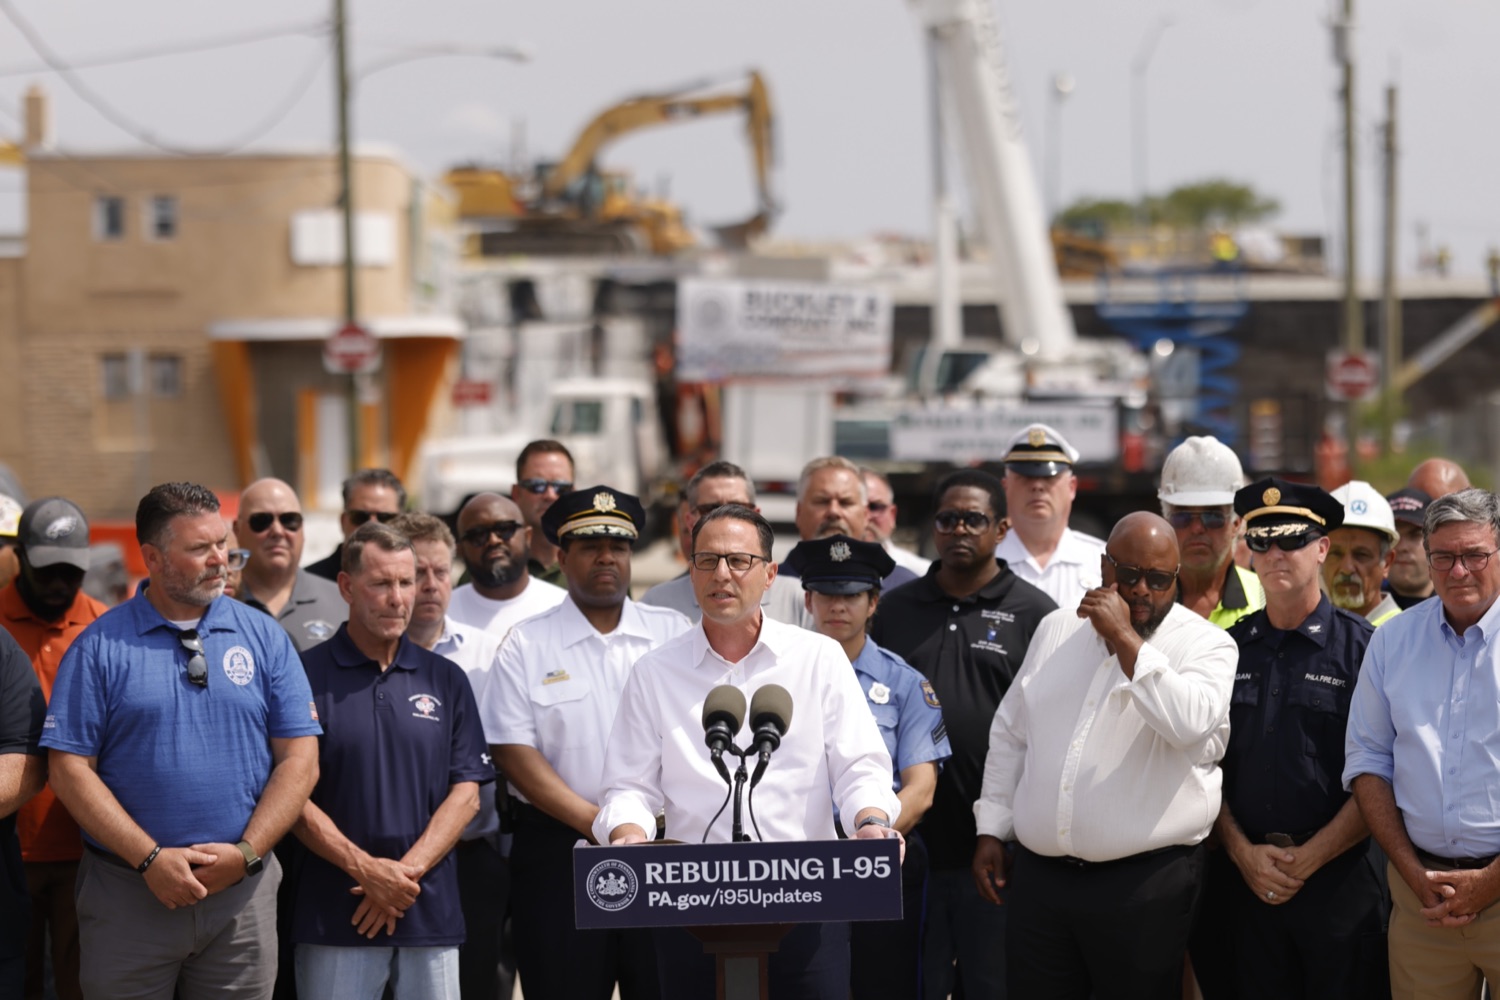 Governor Shapiro, PennDOT Secretary Carroll Announce I-95 Will Reopen This Weekend as the Shapiro Administrations Response Continues Ahead of Schedule<br><a href="https://filesource.amperwave.net/commonwealthofpa/photo/Image12.jpeg" target="_blank">⇣ Download Photo</a>